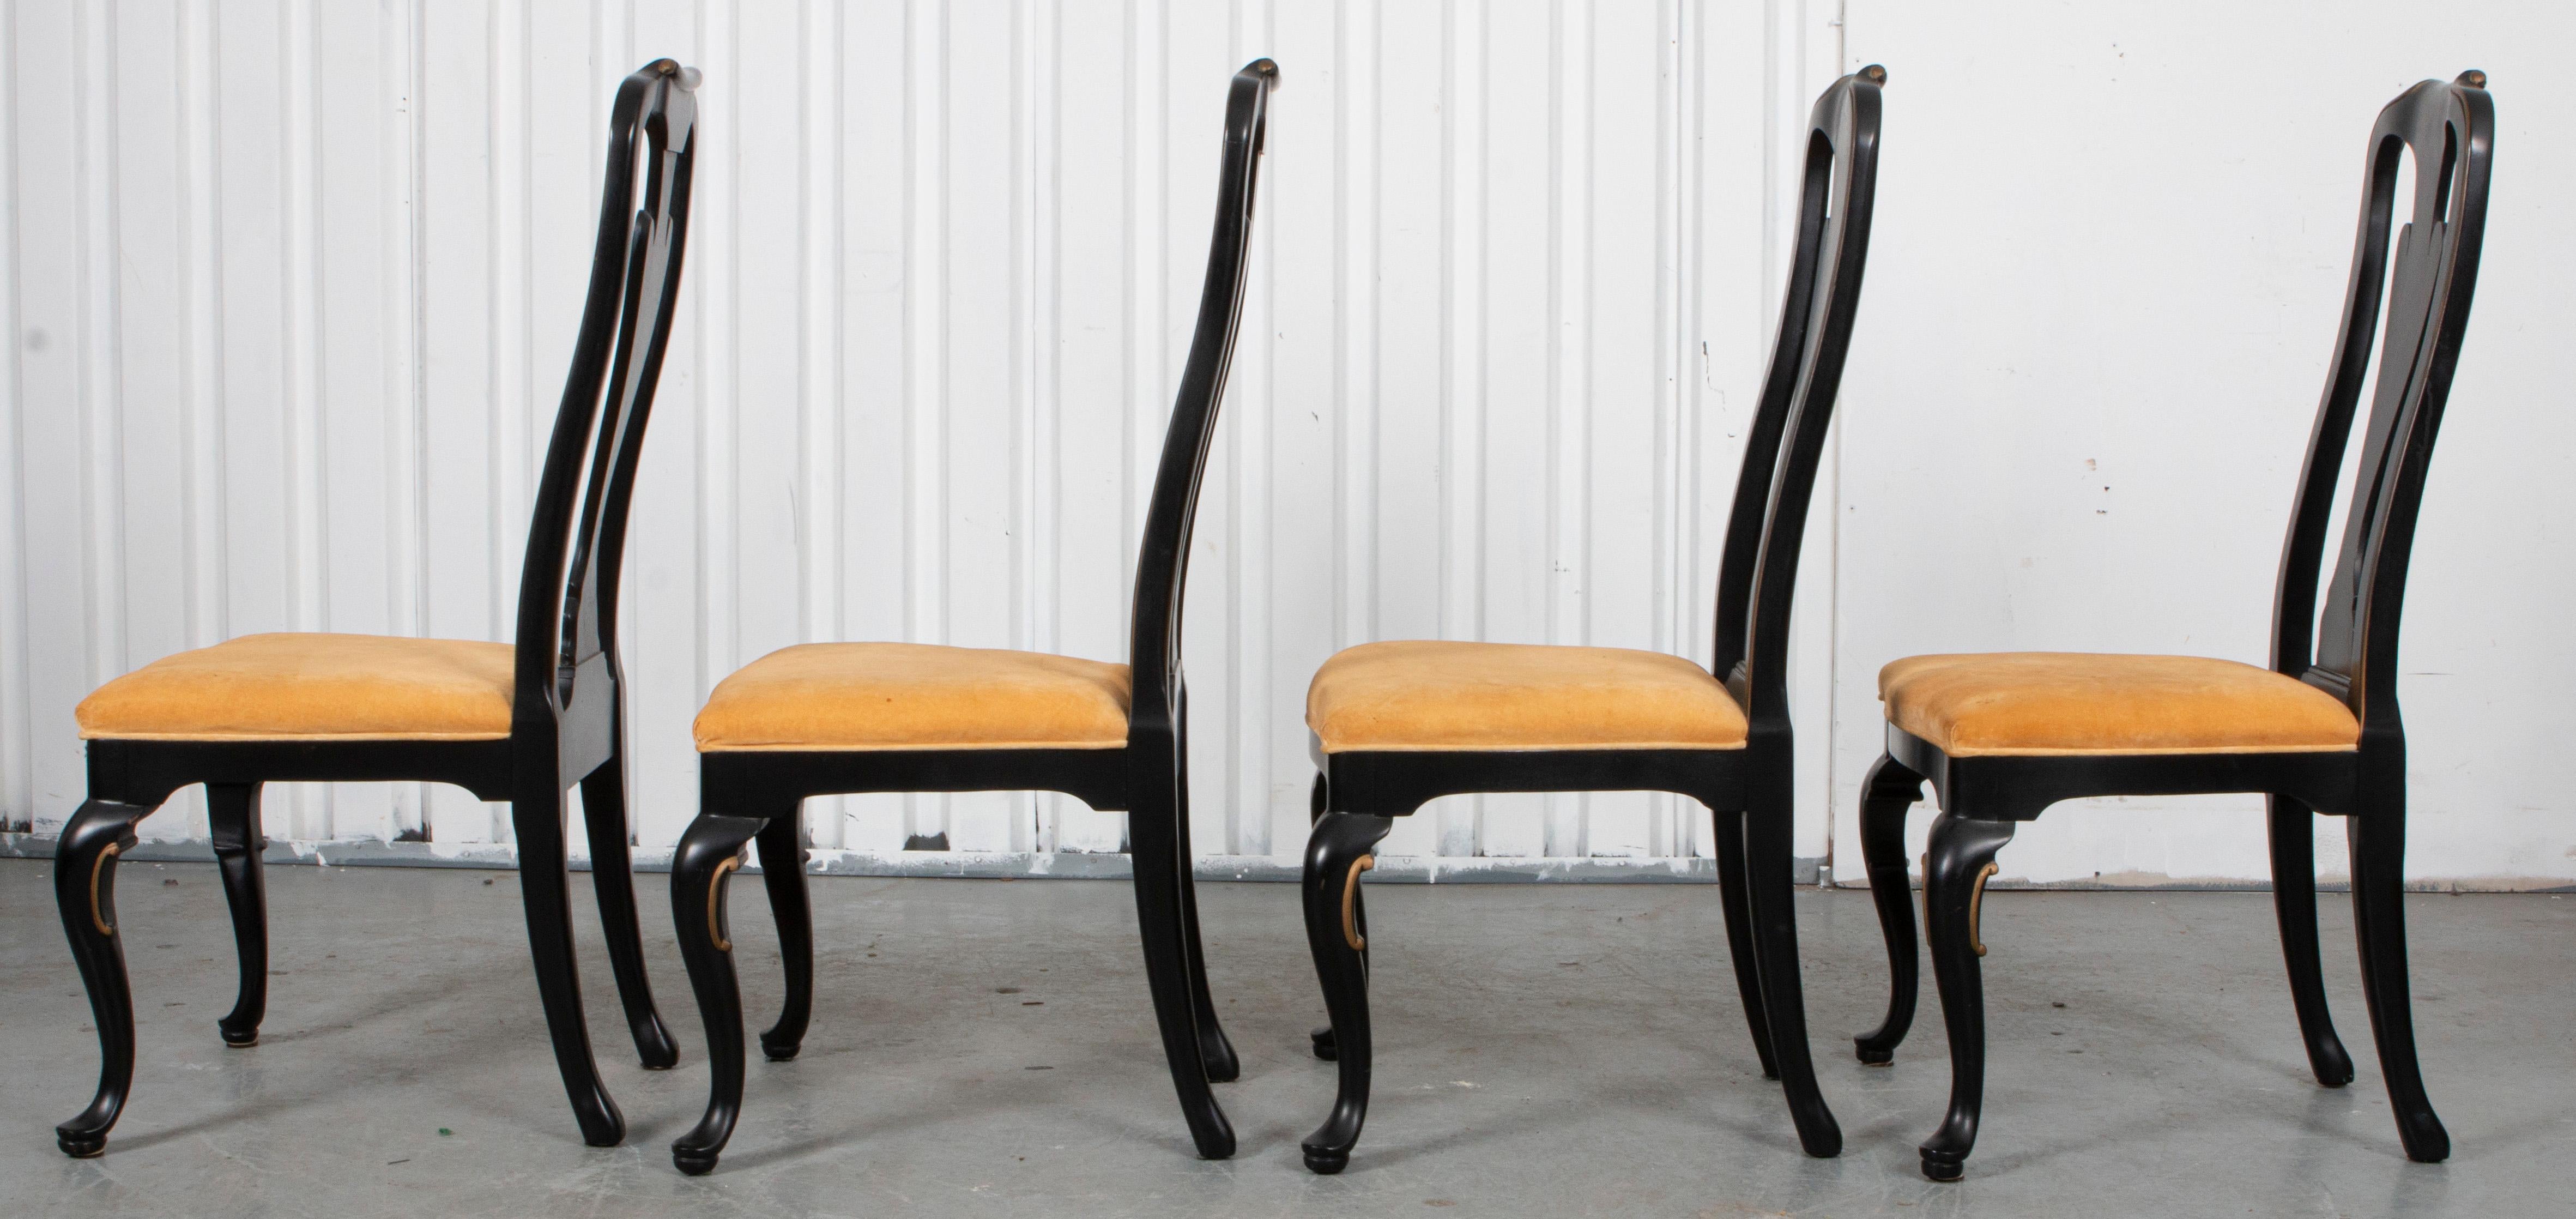 20th Century Queen Anne Style Ebonized Side Chairs, 4 For Sale